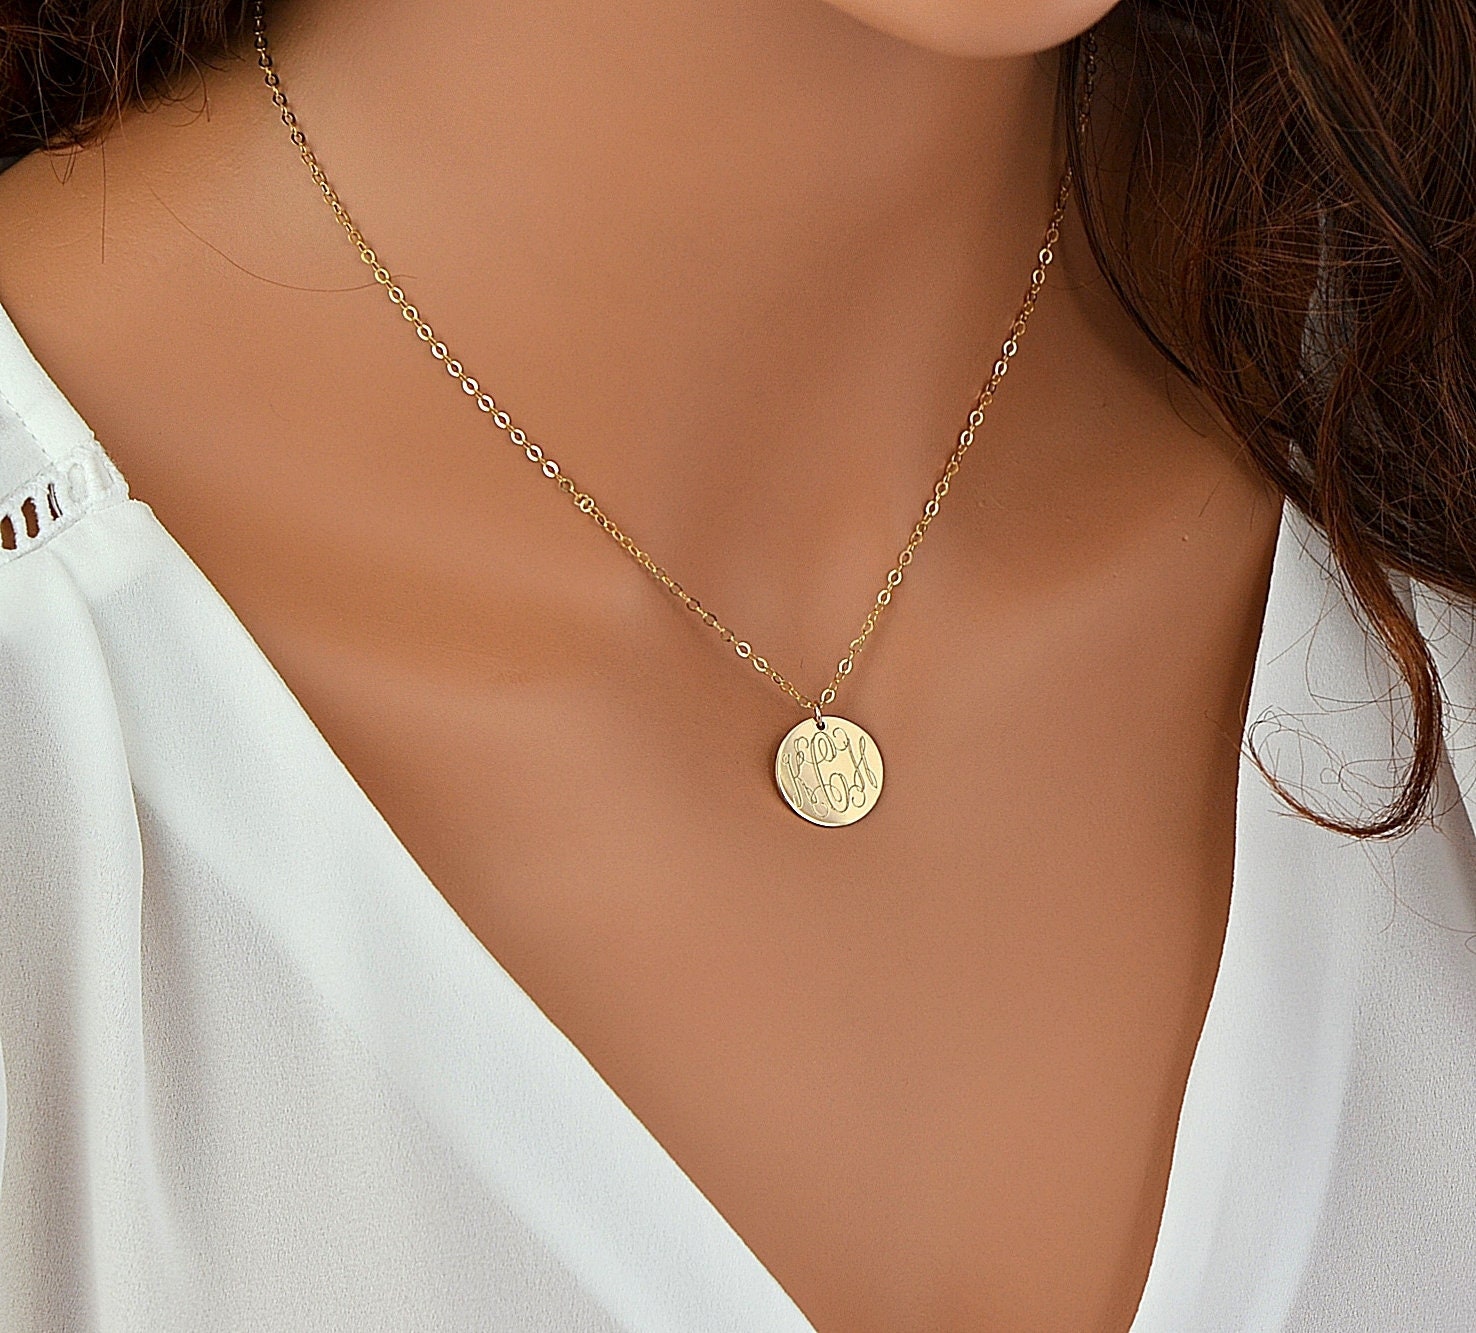 Mini Hammered Disc Initial Necklace | Posh Totty Designs